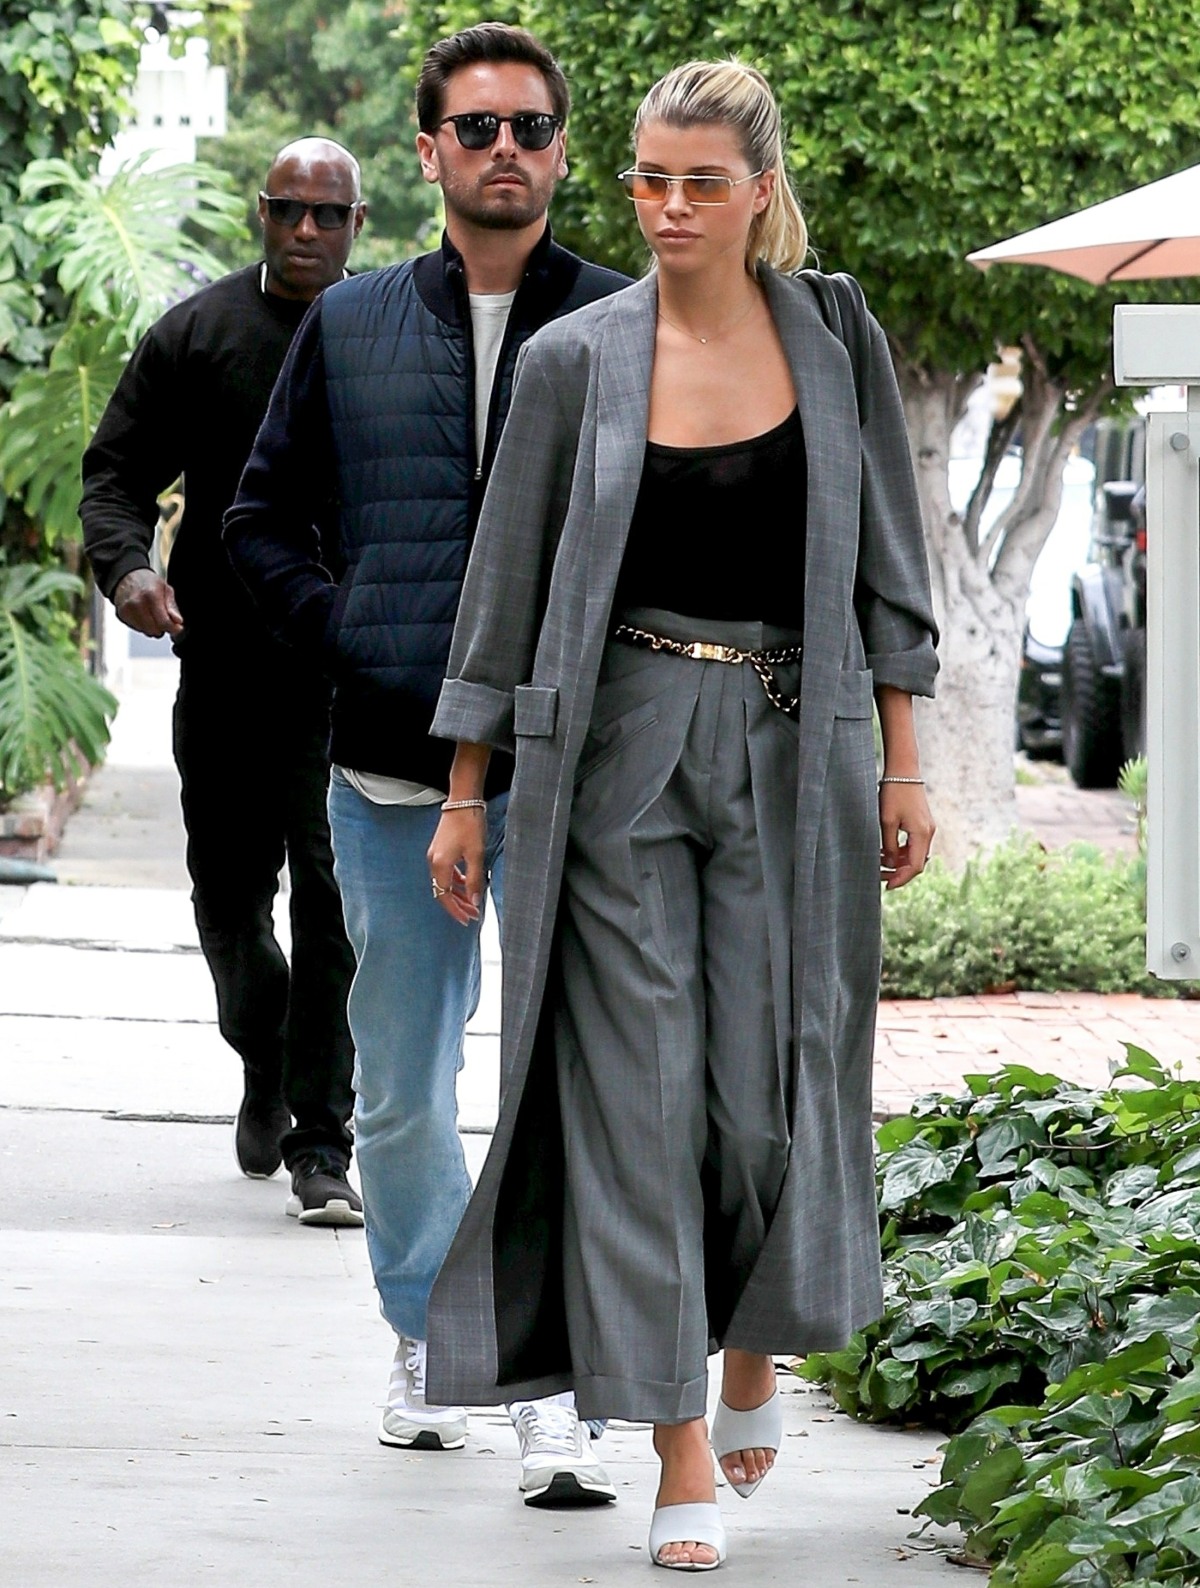 Sofia Richie and Scott Disick go shopping after lunch at Il Pastaio